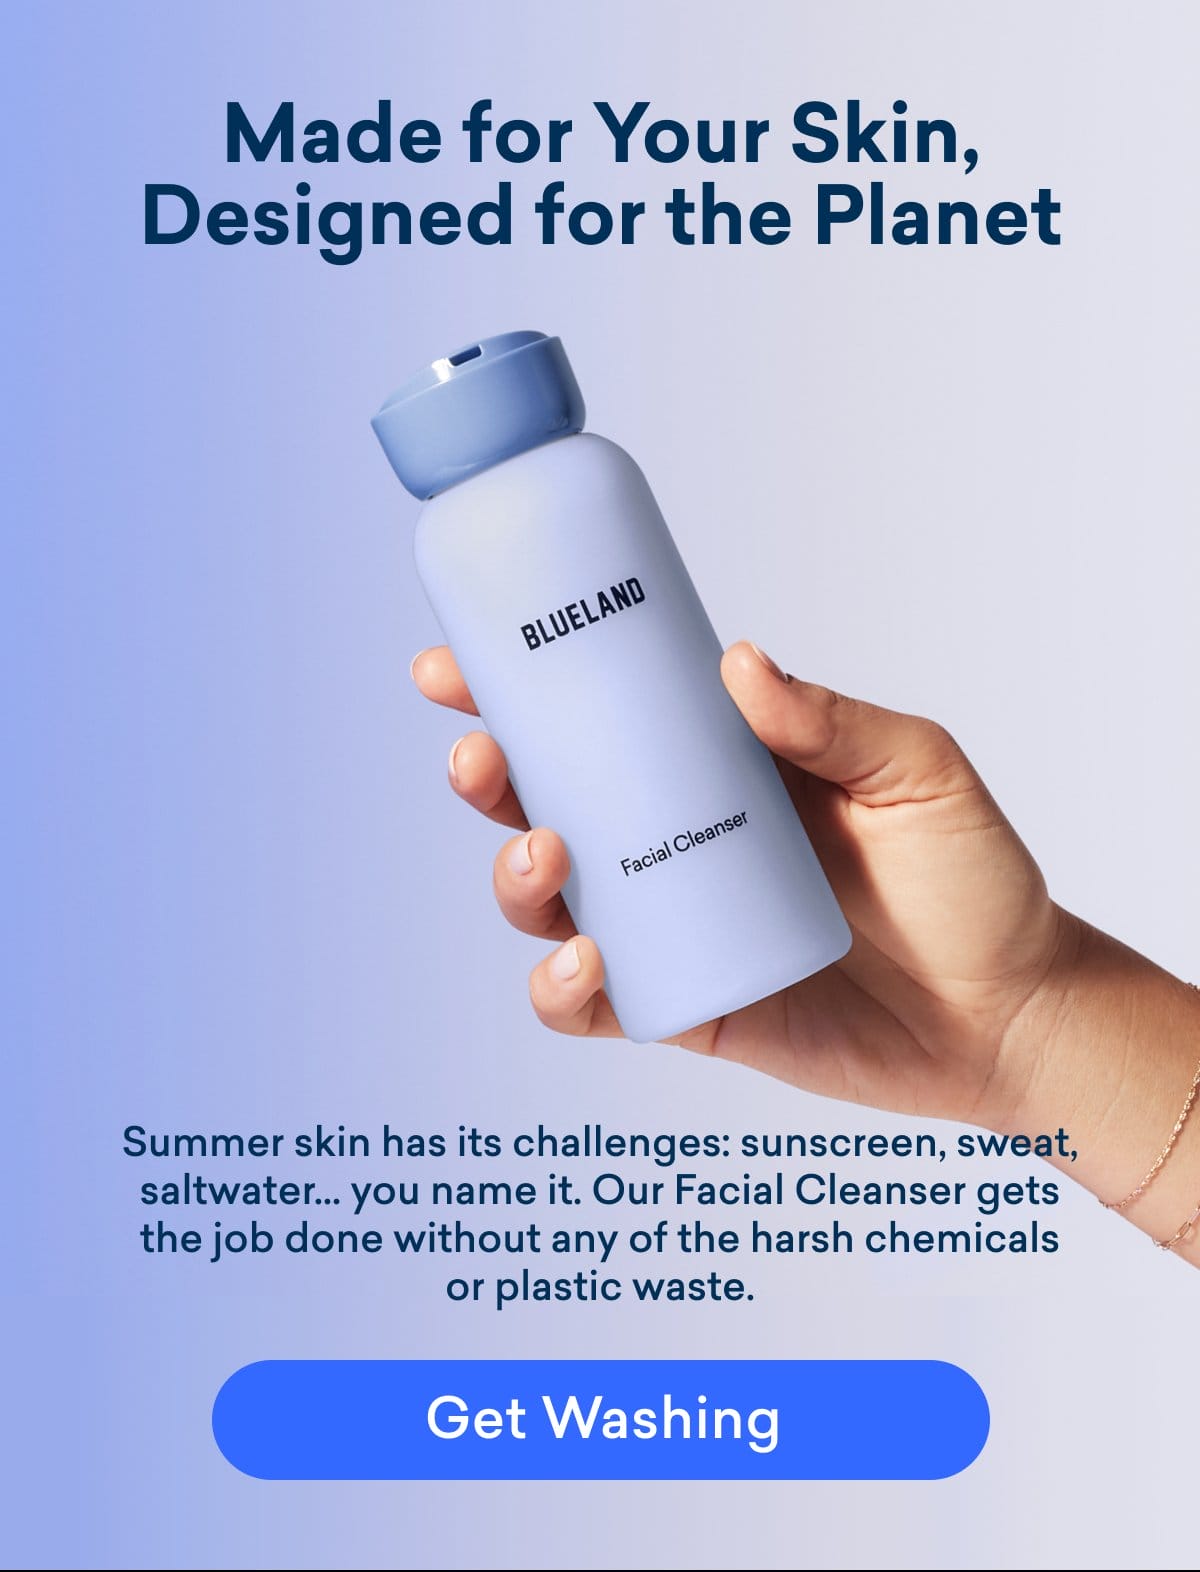 Made for your skin, designed for the planet